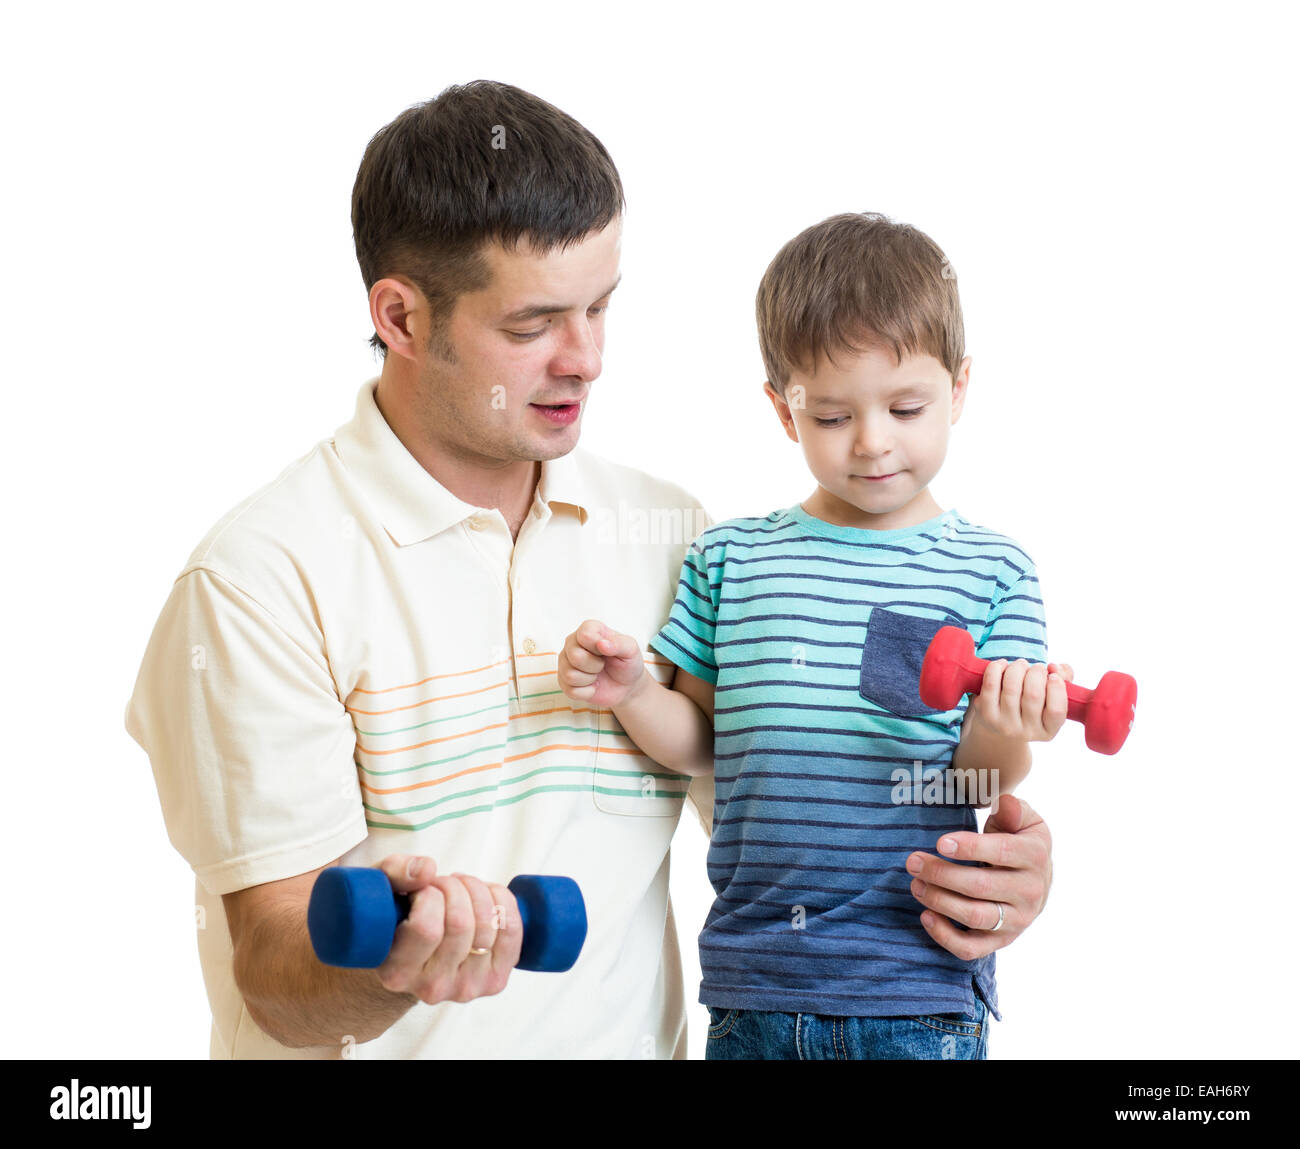 middle-aged man and kid do exercise with dumbbell Stock Photo